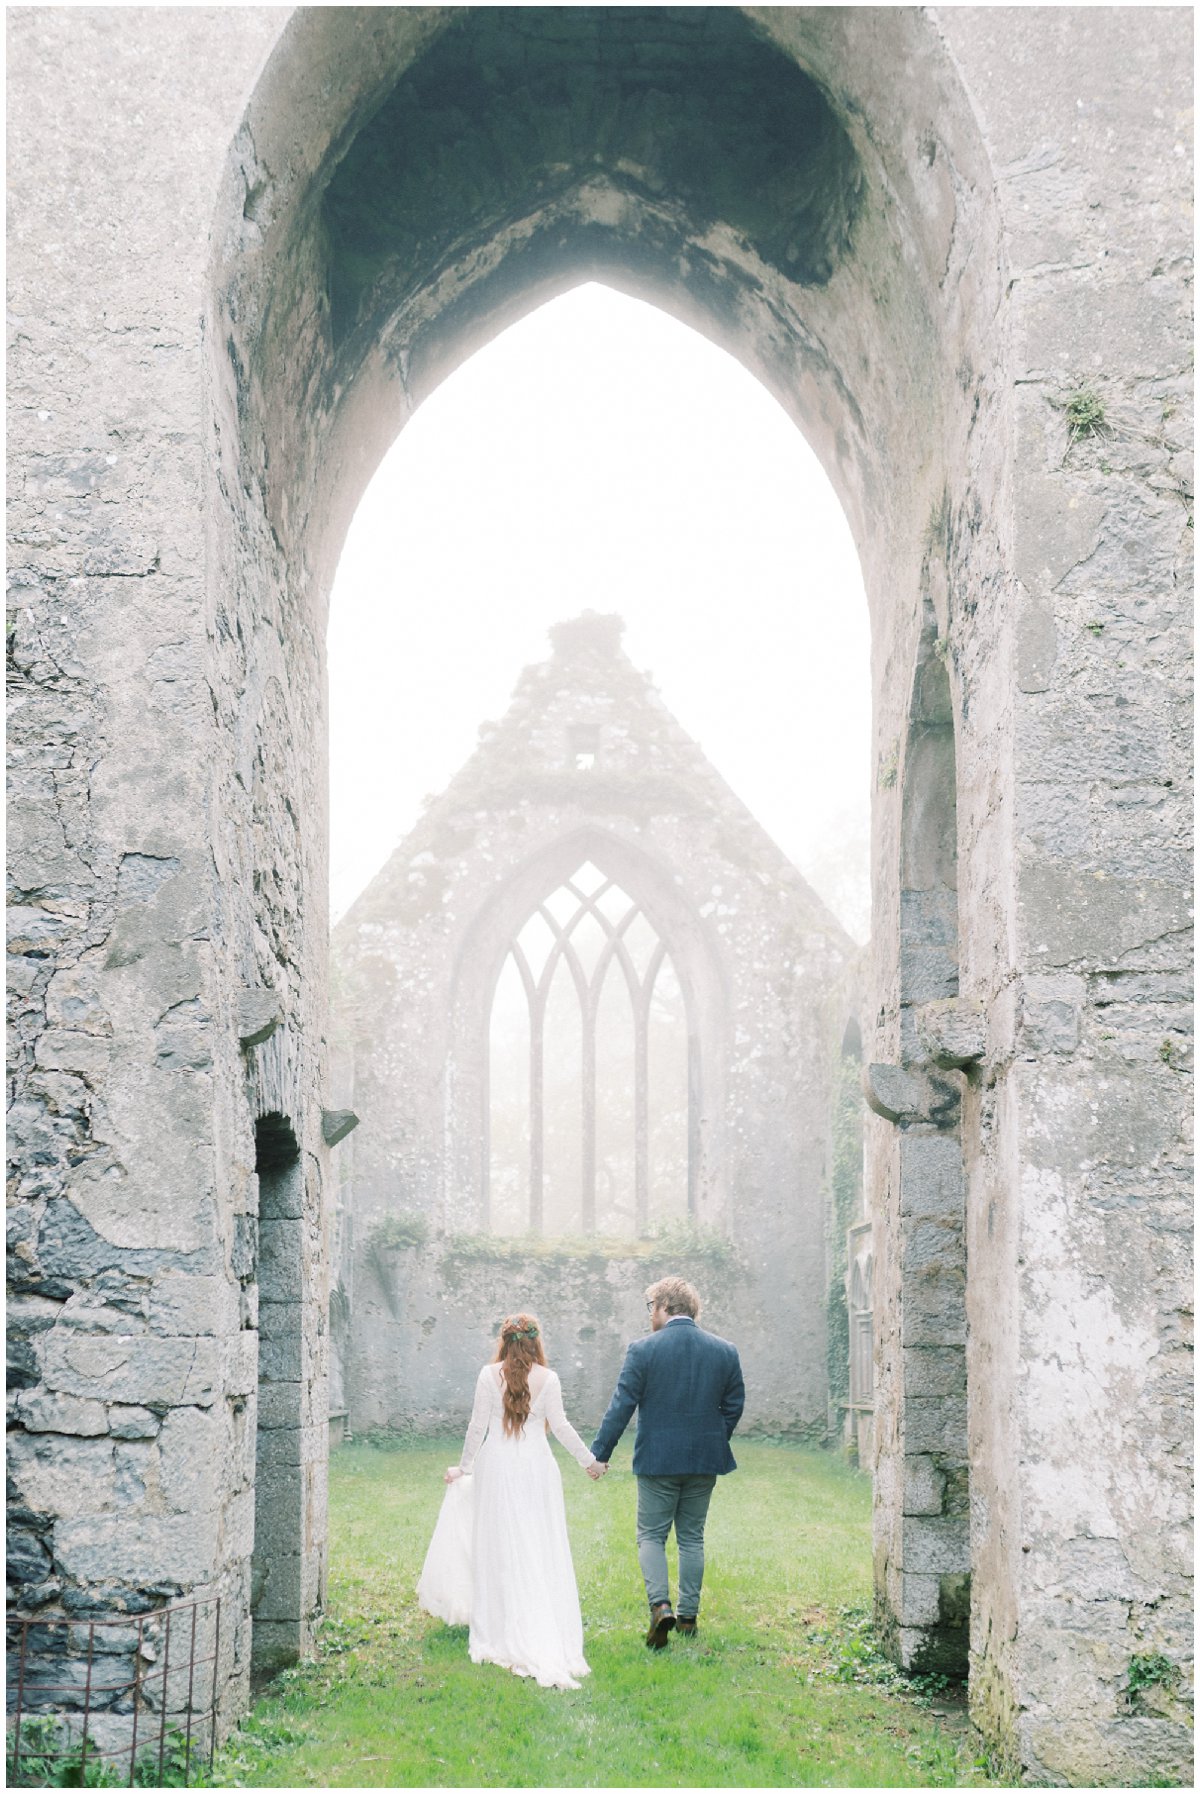 Ireland wedding photo at the Adare Franciscan Friary in Ireland